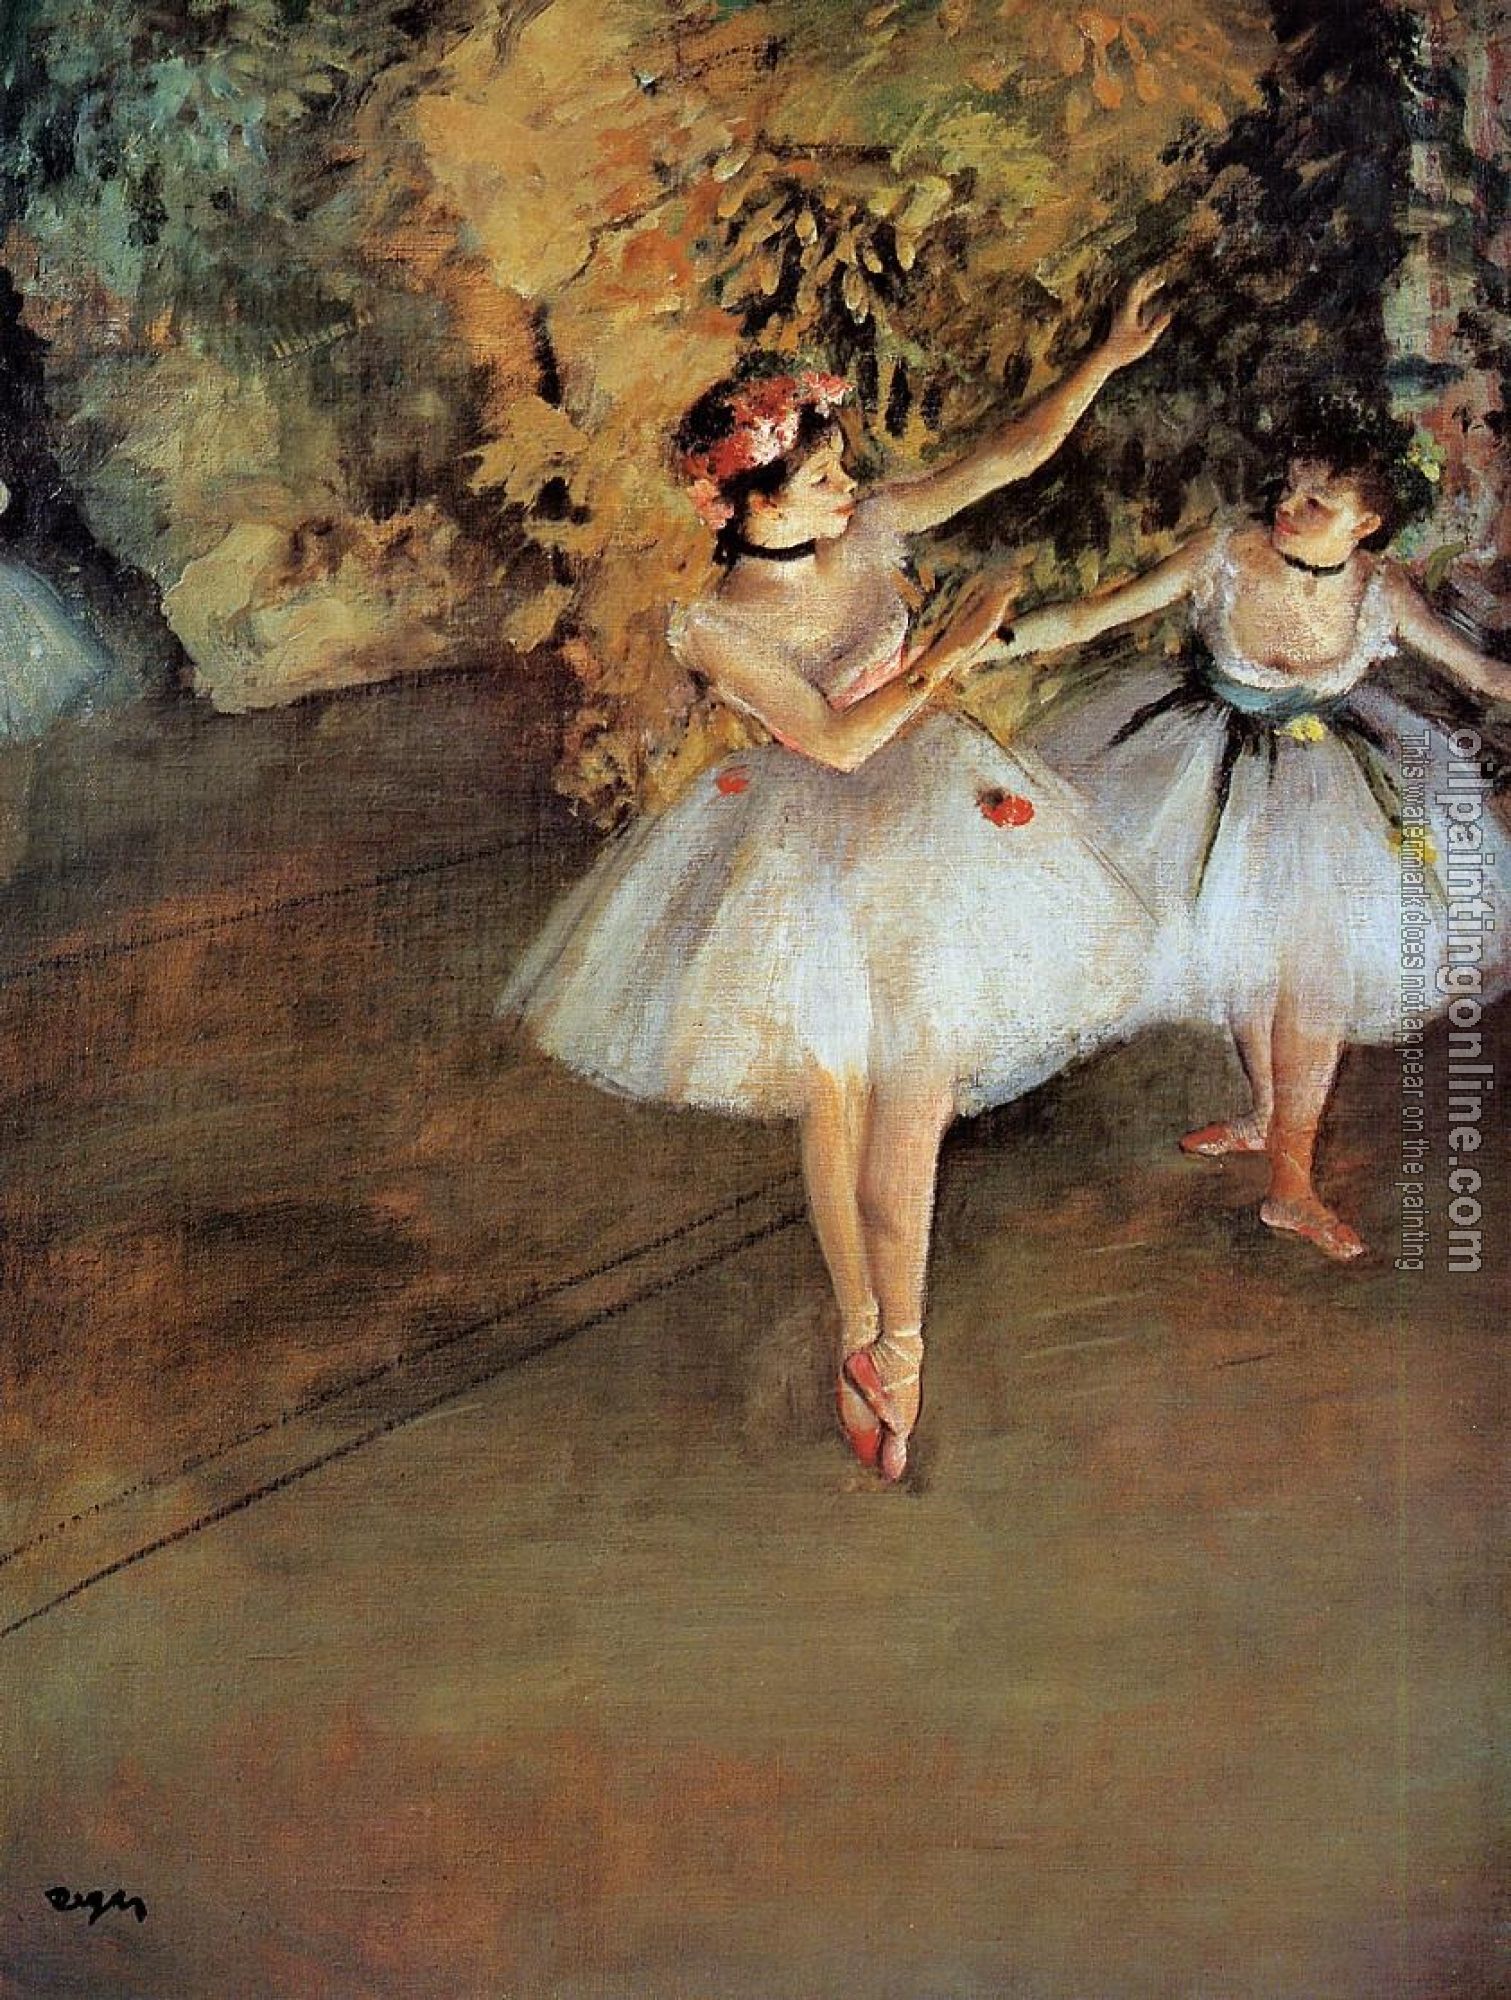 Degas, Edgar - Two Dancers on Stage